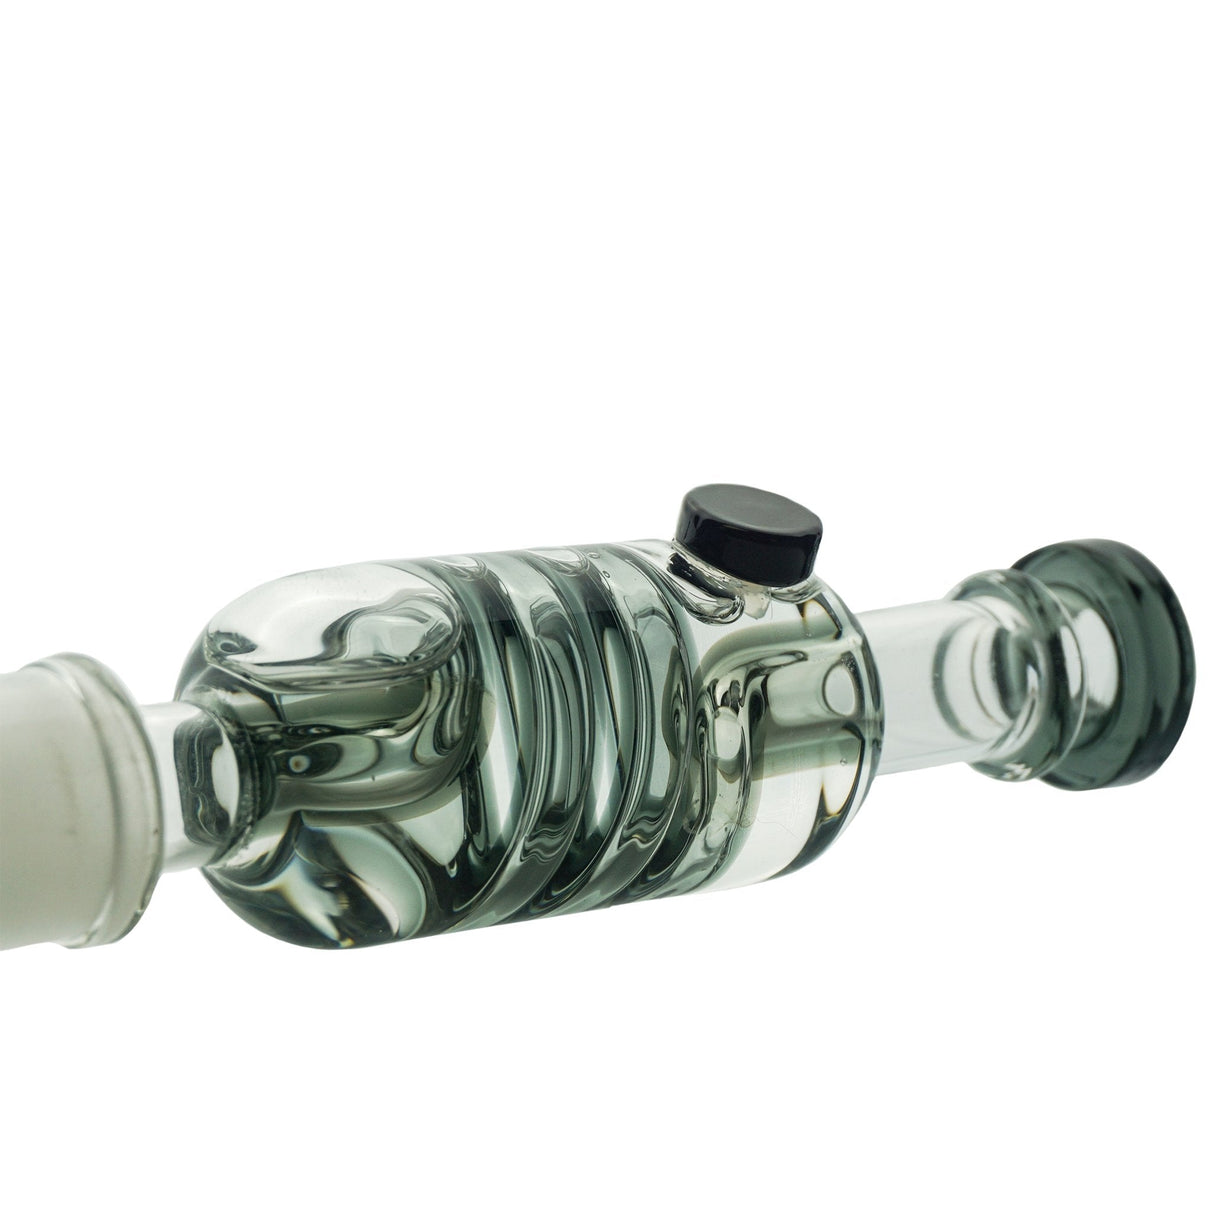 Freeze Pipe Nectar Collector Kit Close-Up, Metal and Glass, Easy to Use Design